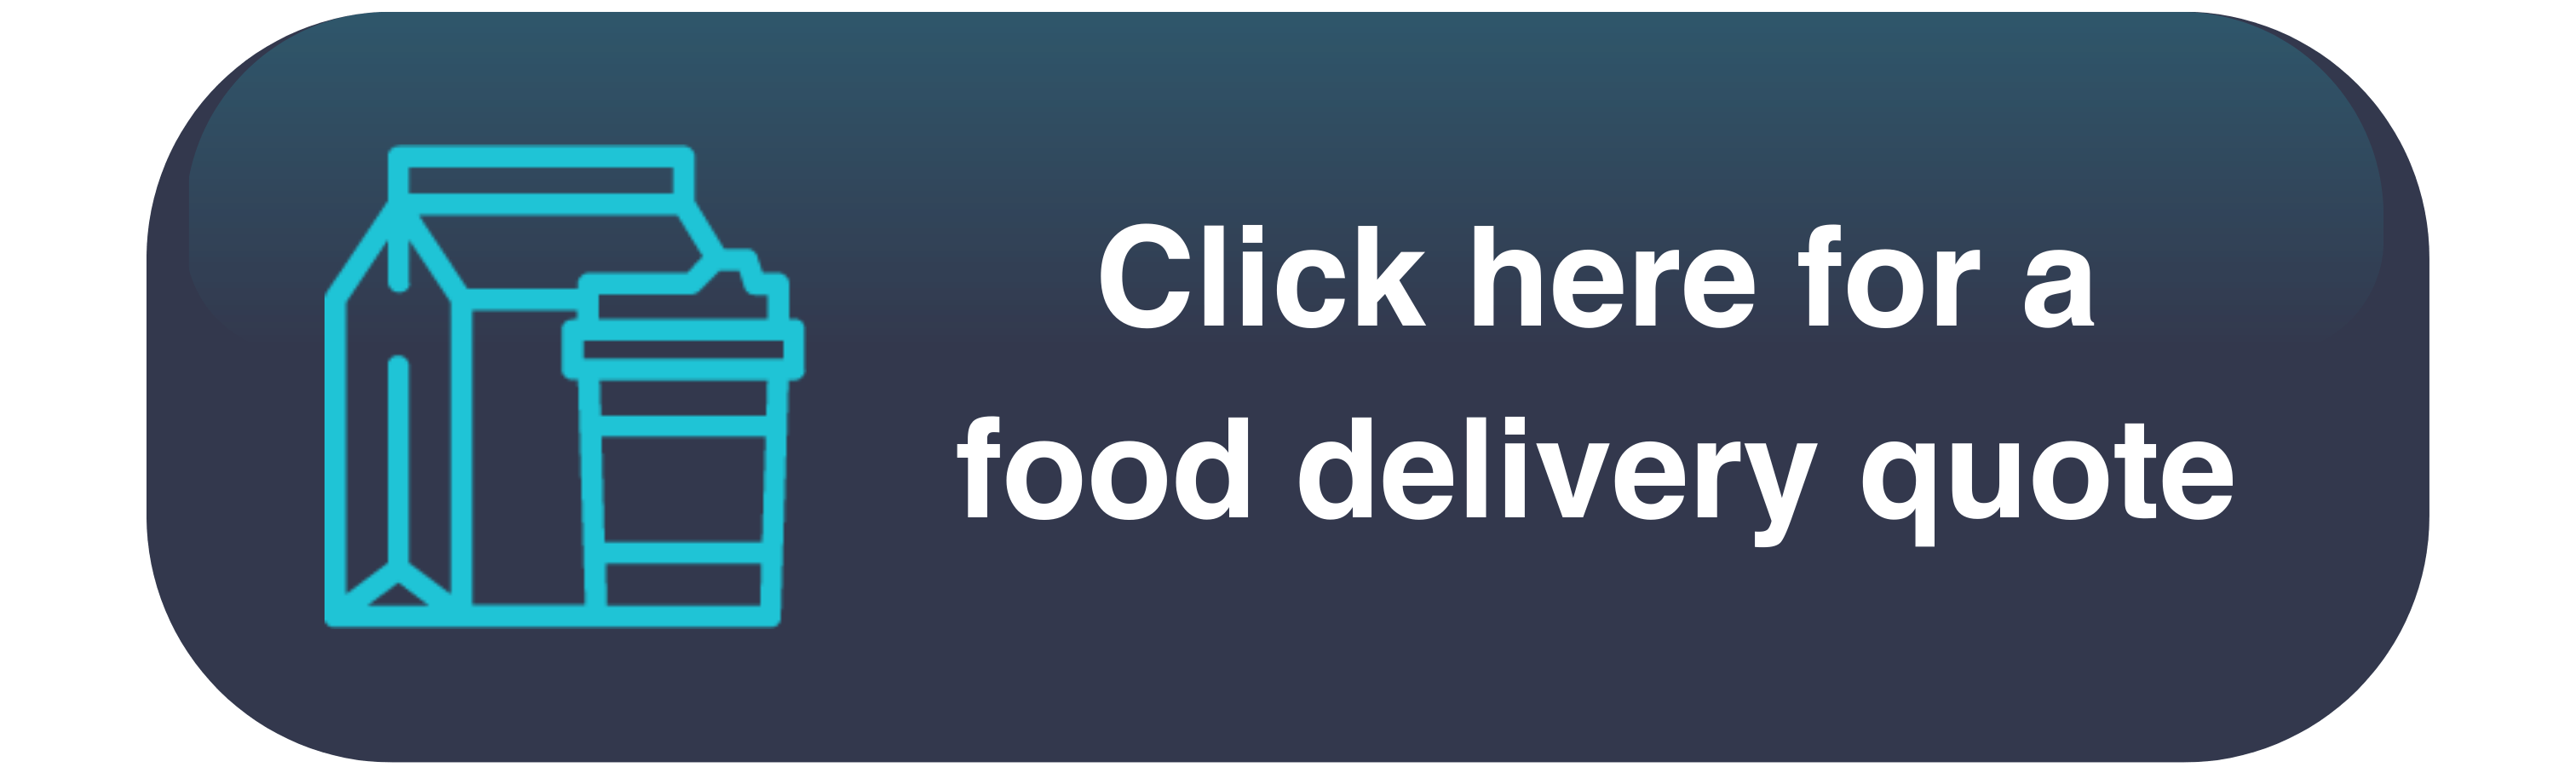 Click for food delivery quote